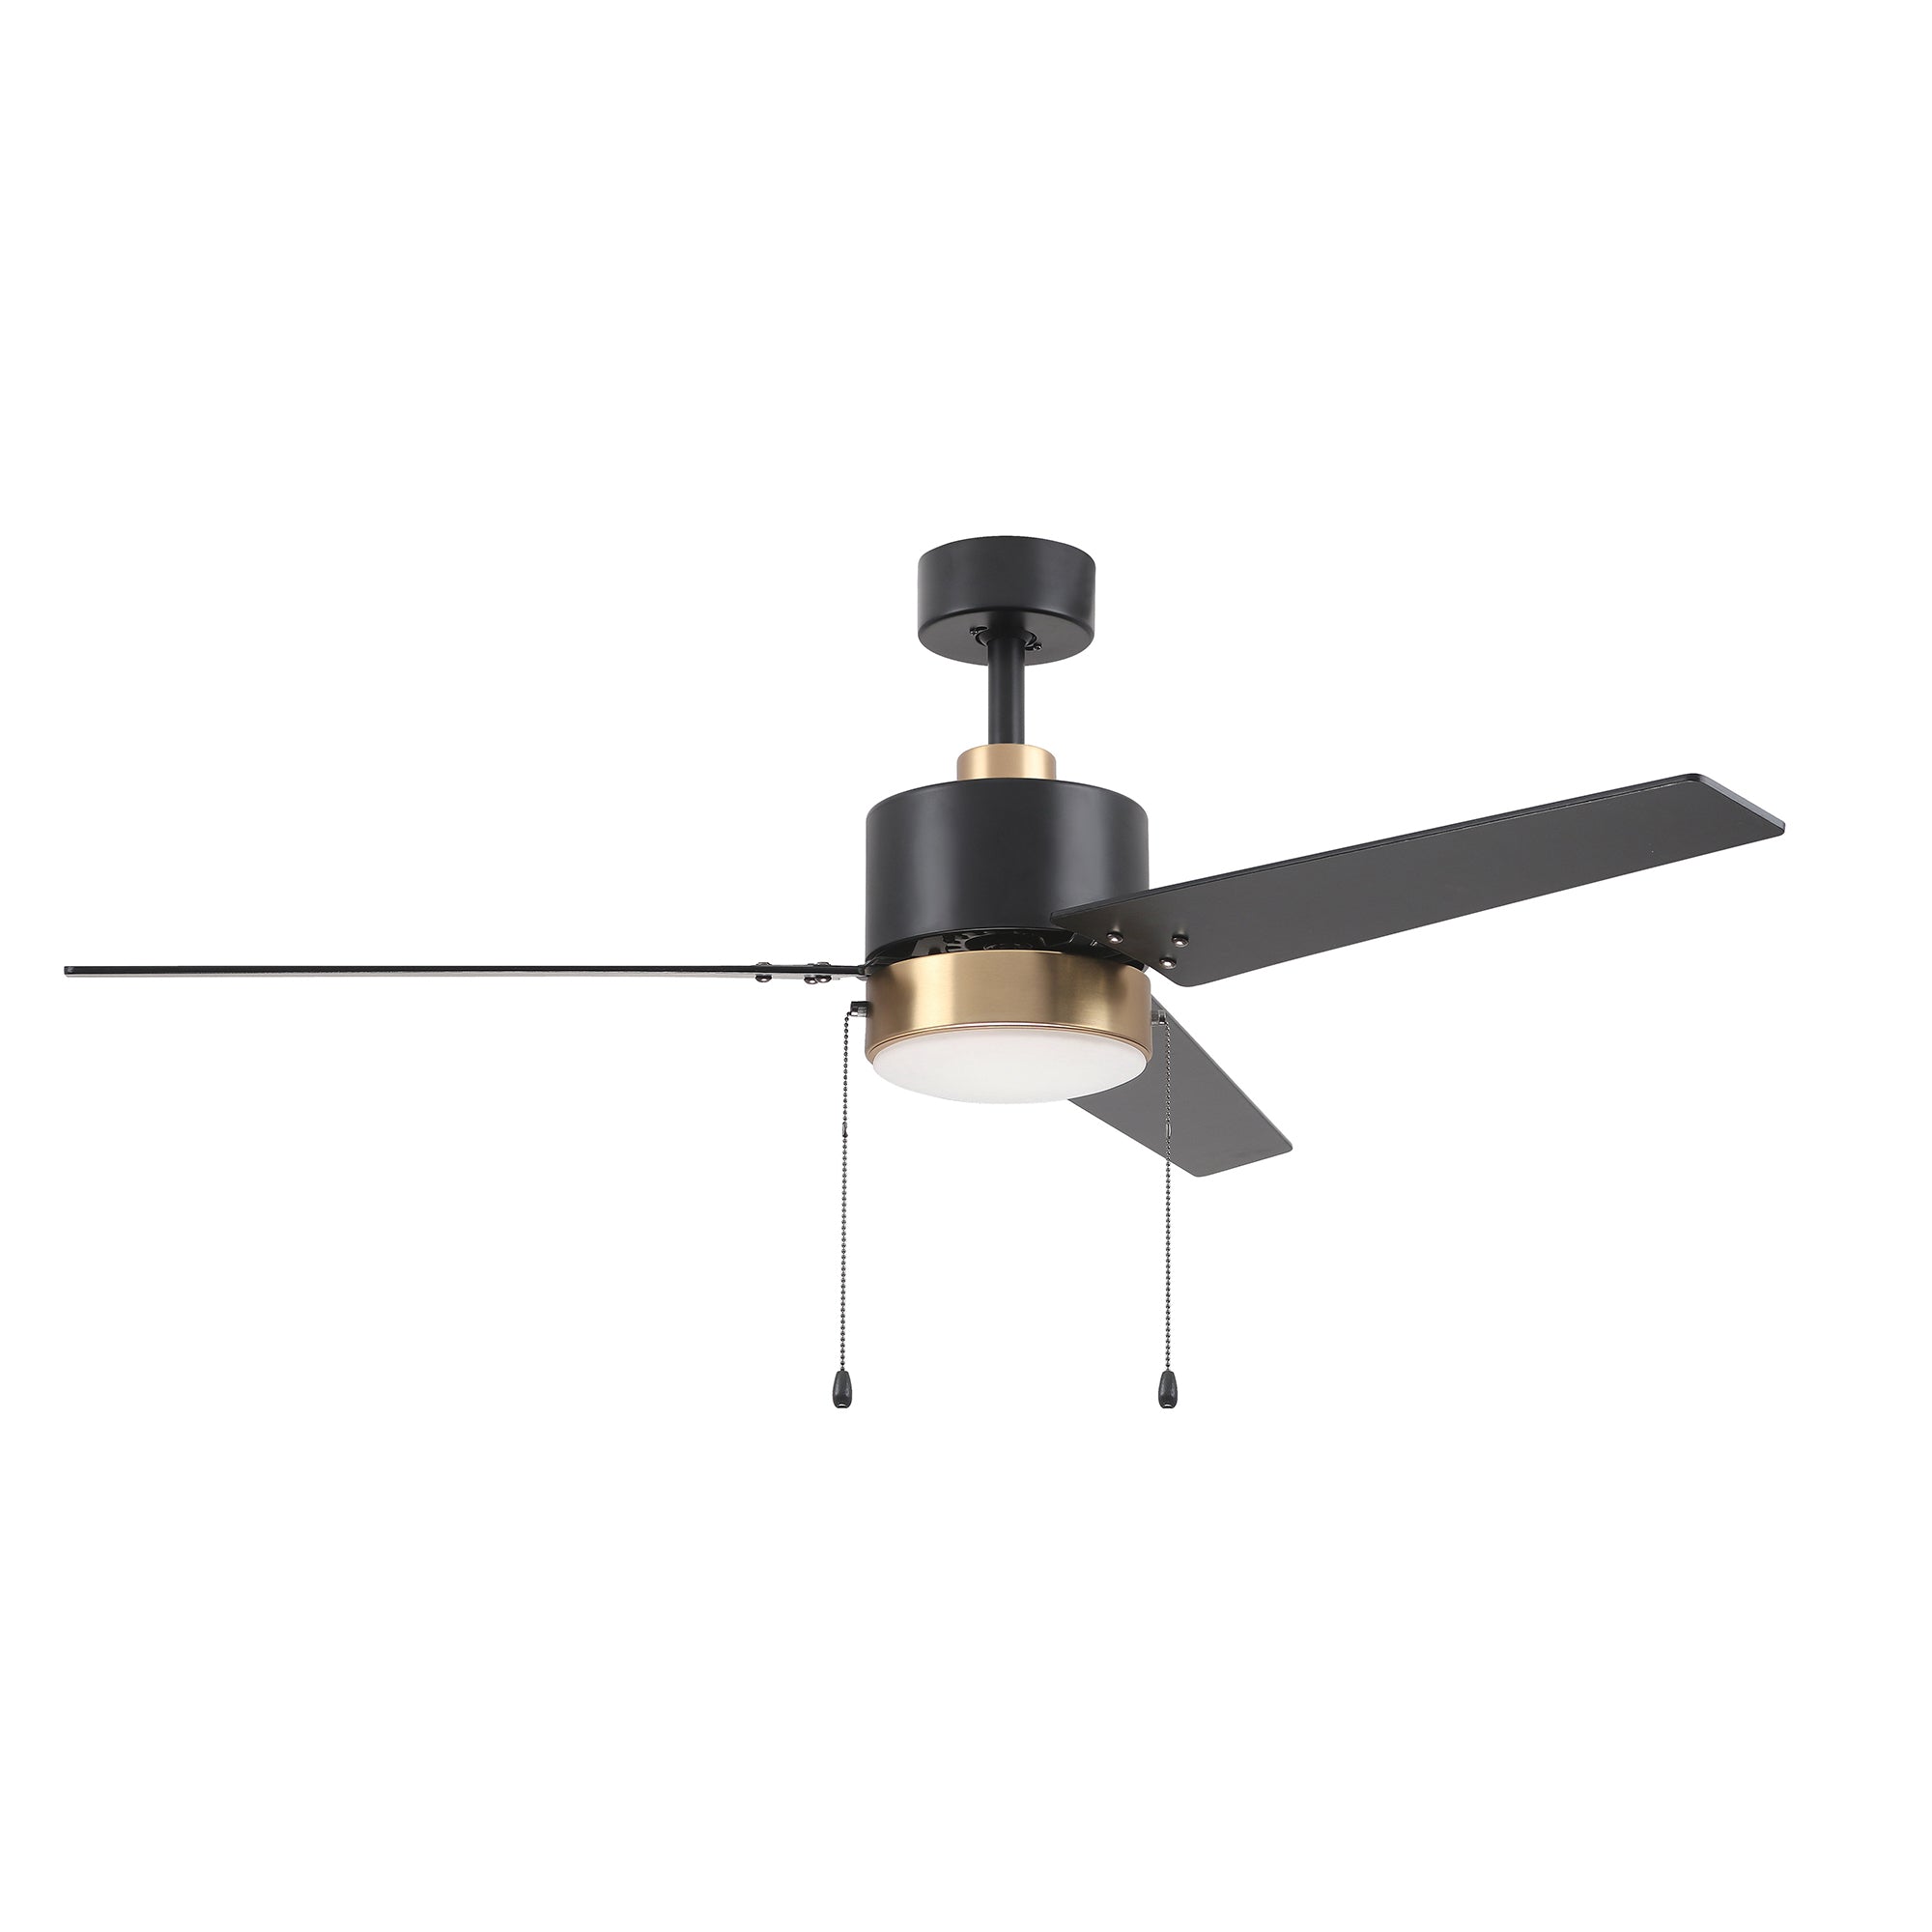 This Dulac 52''Ceiling Fan keeps your space cool, bright, and stylish. It is a soft modern masterpiece perfect for your large indoor living spaces. This Model ceiling fan is a simplicity designing with White finish, use elegant Plywood blades and has an integrated 3000K LED warm light. The fan feature the pull chain switches to set fan speeds and lighting On/Off. #color_black